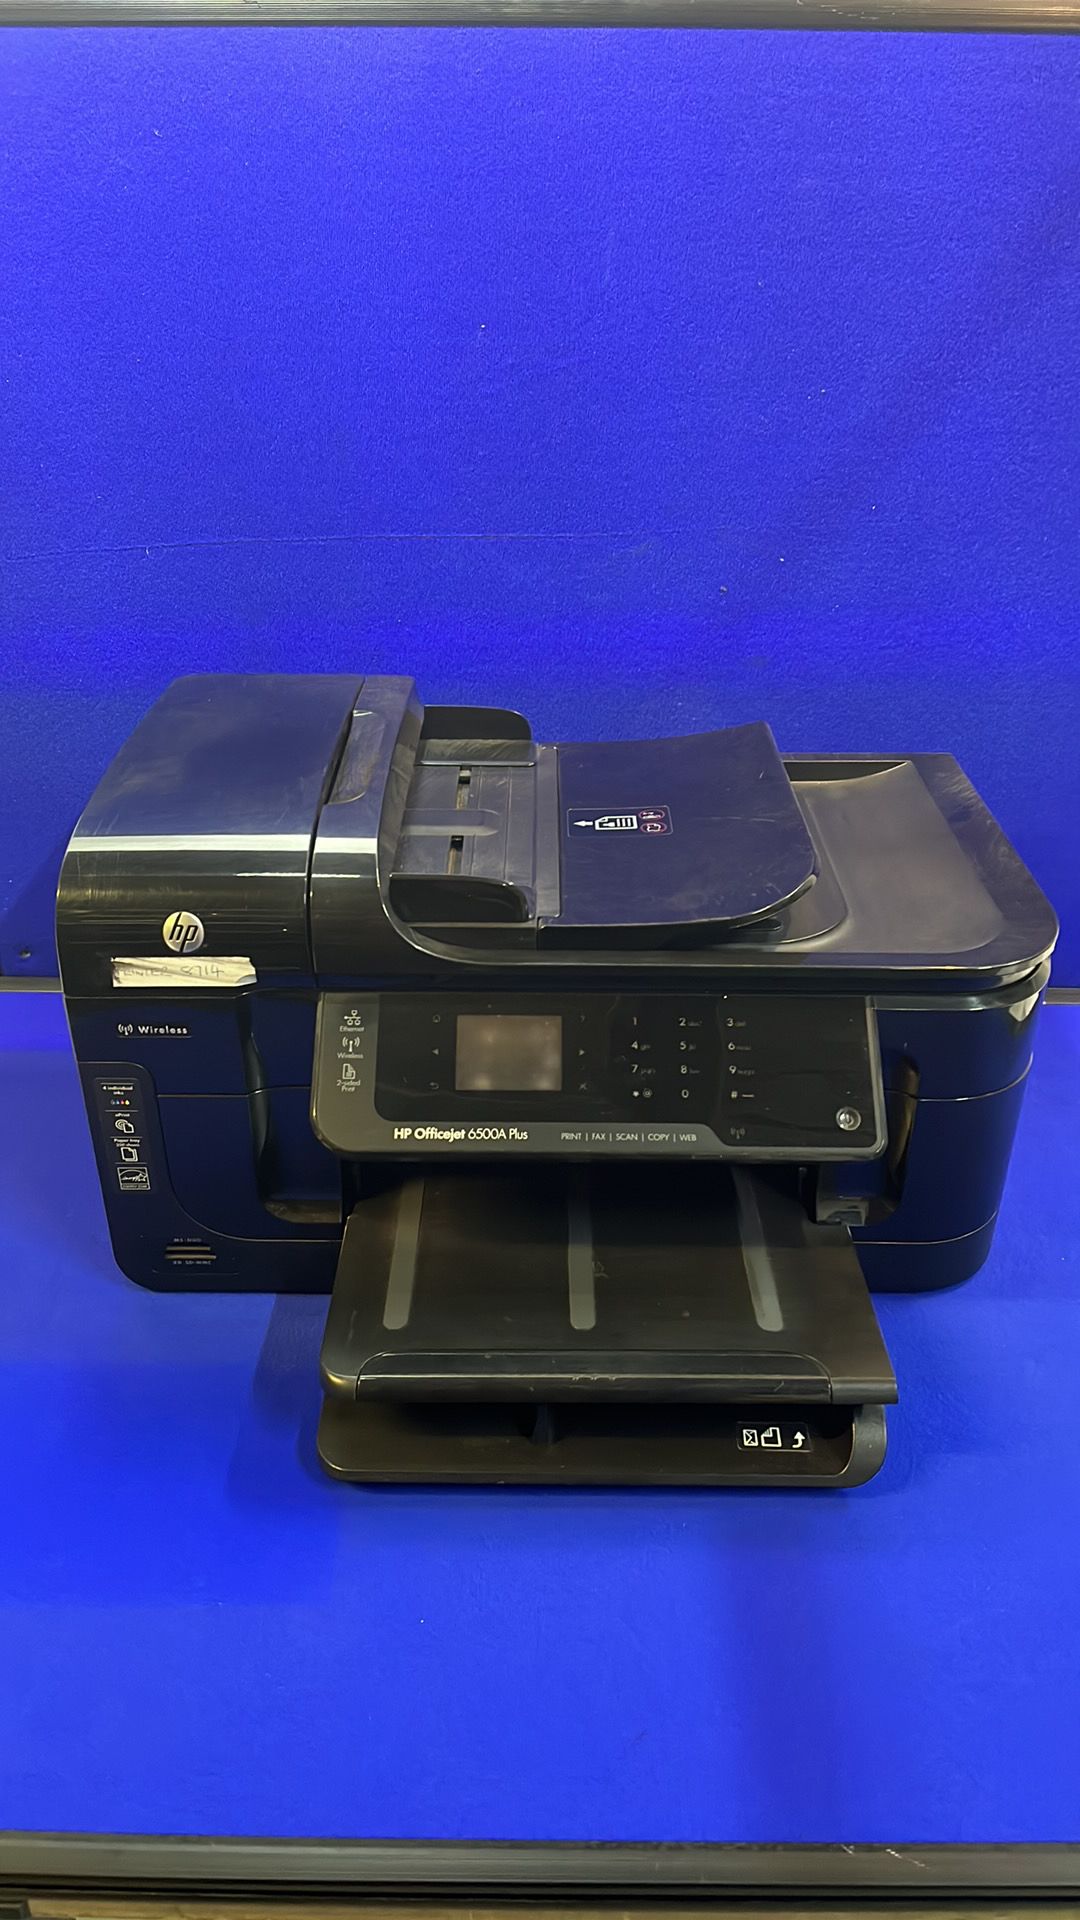 HP Officejet 6500A Plus All In One Printer